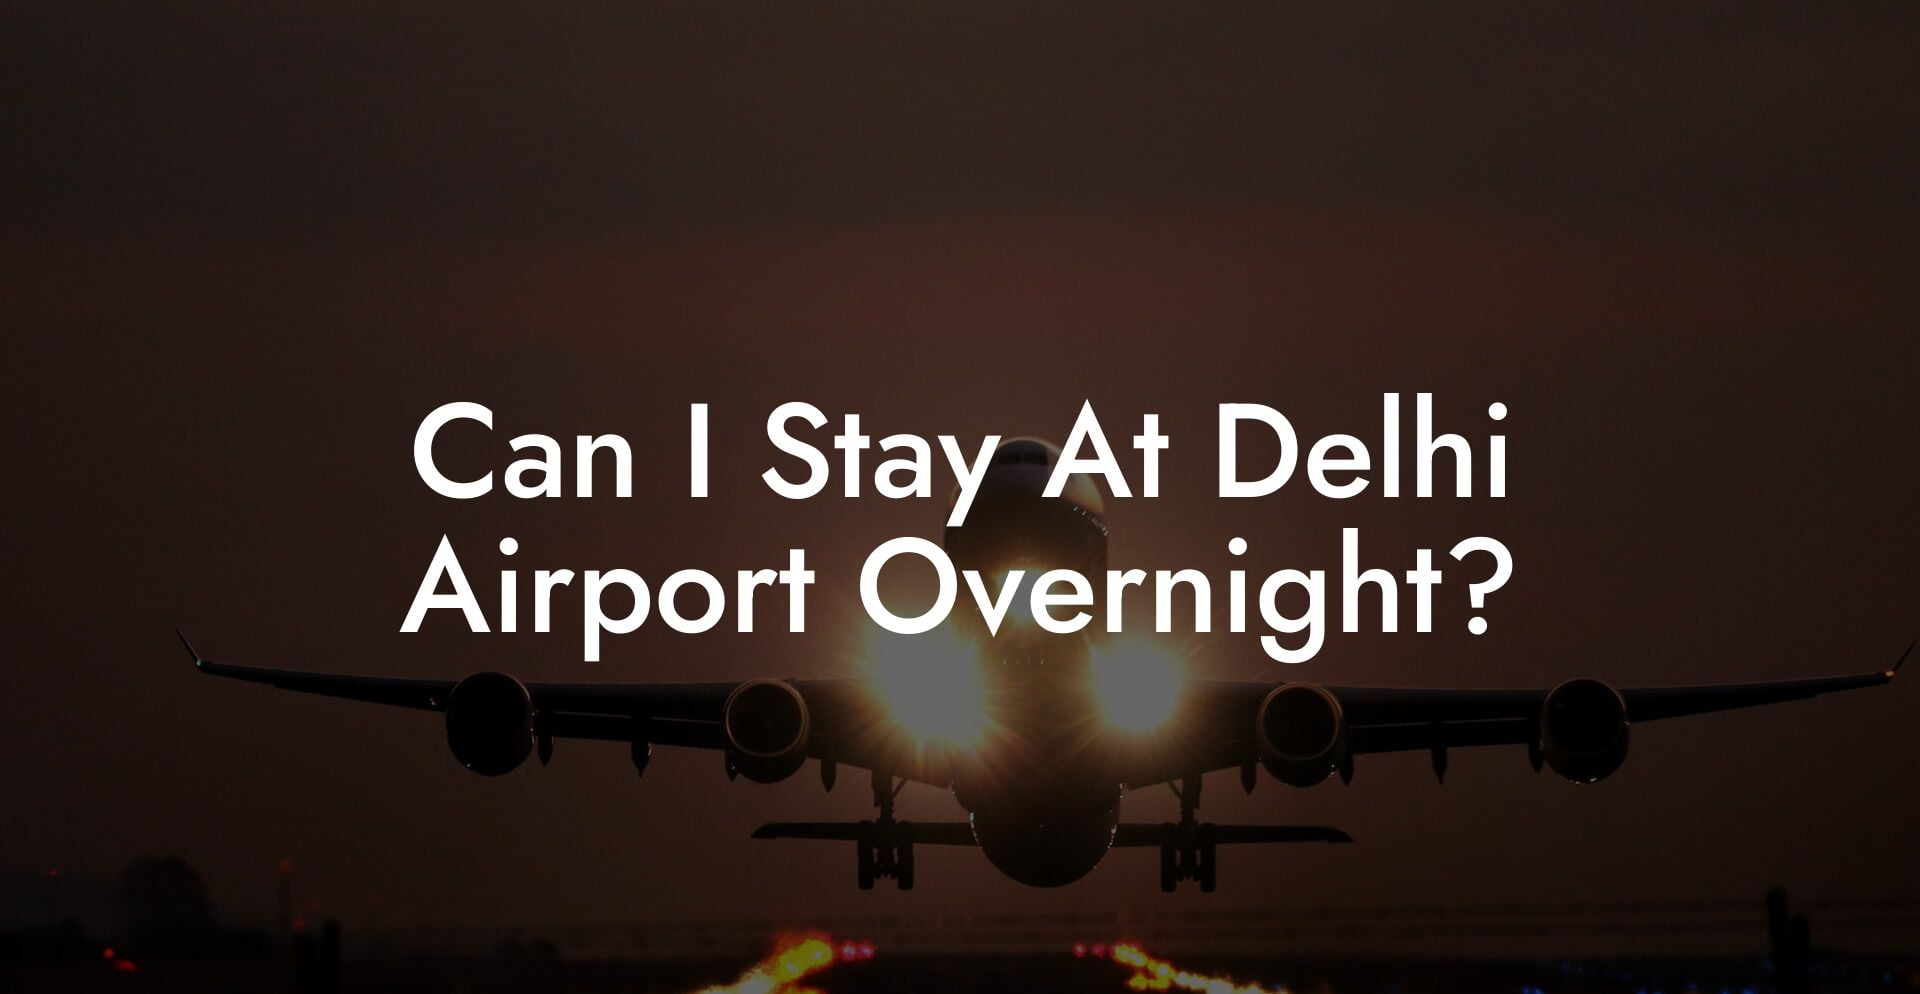 Can I Stay At Delhi Airport Overnight?